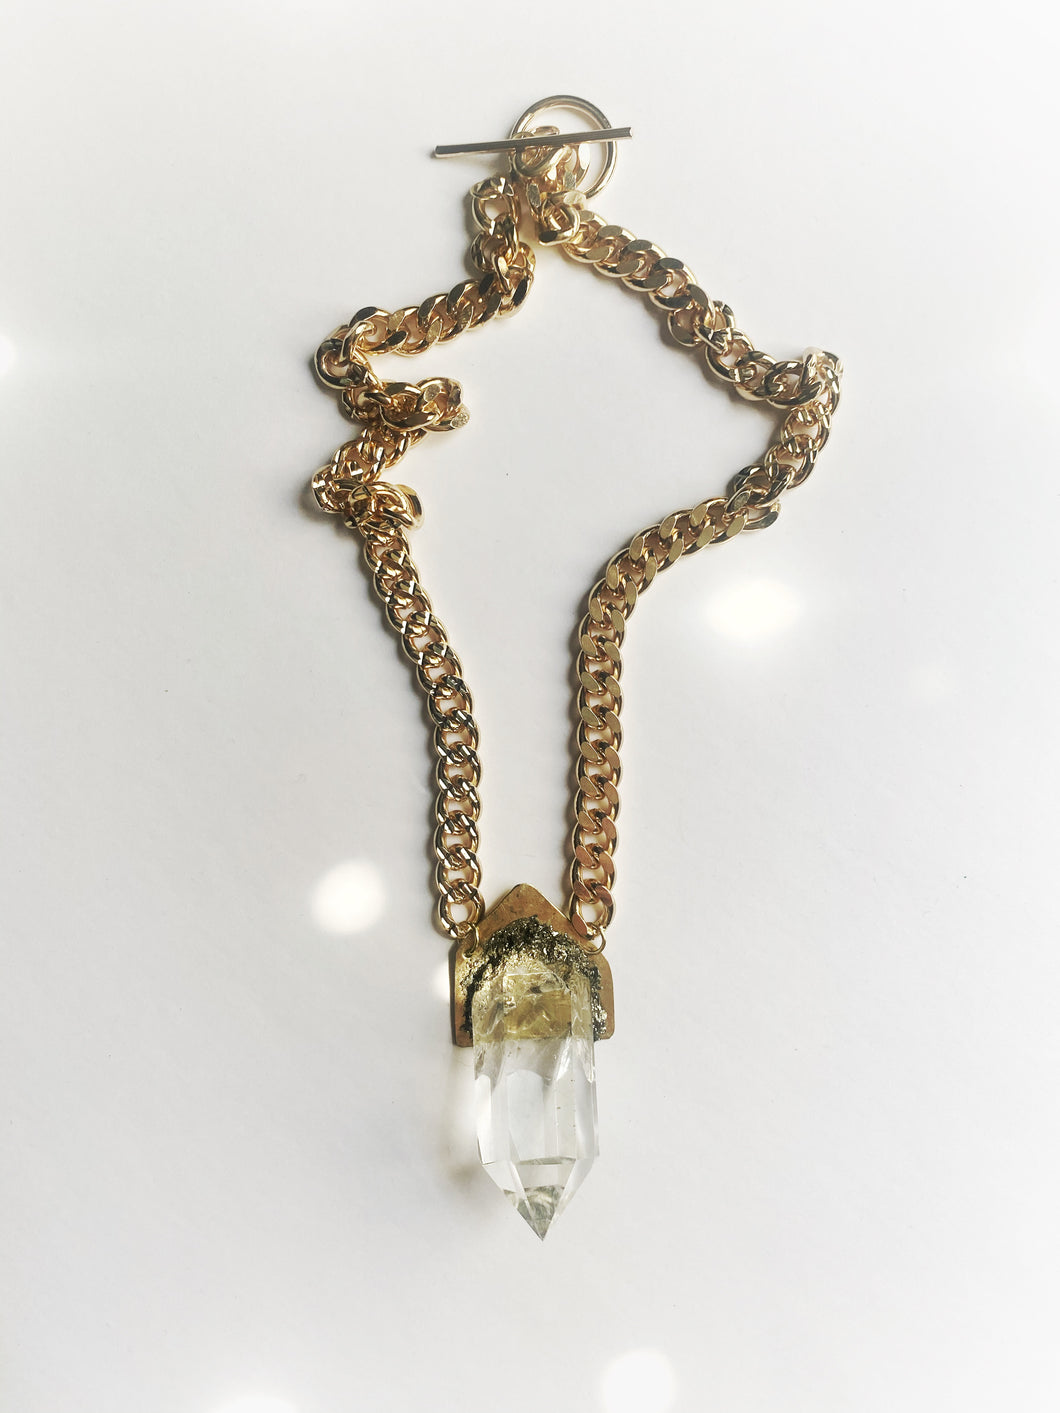 HEAVY METAL crystal quartz and pyrite point necklace